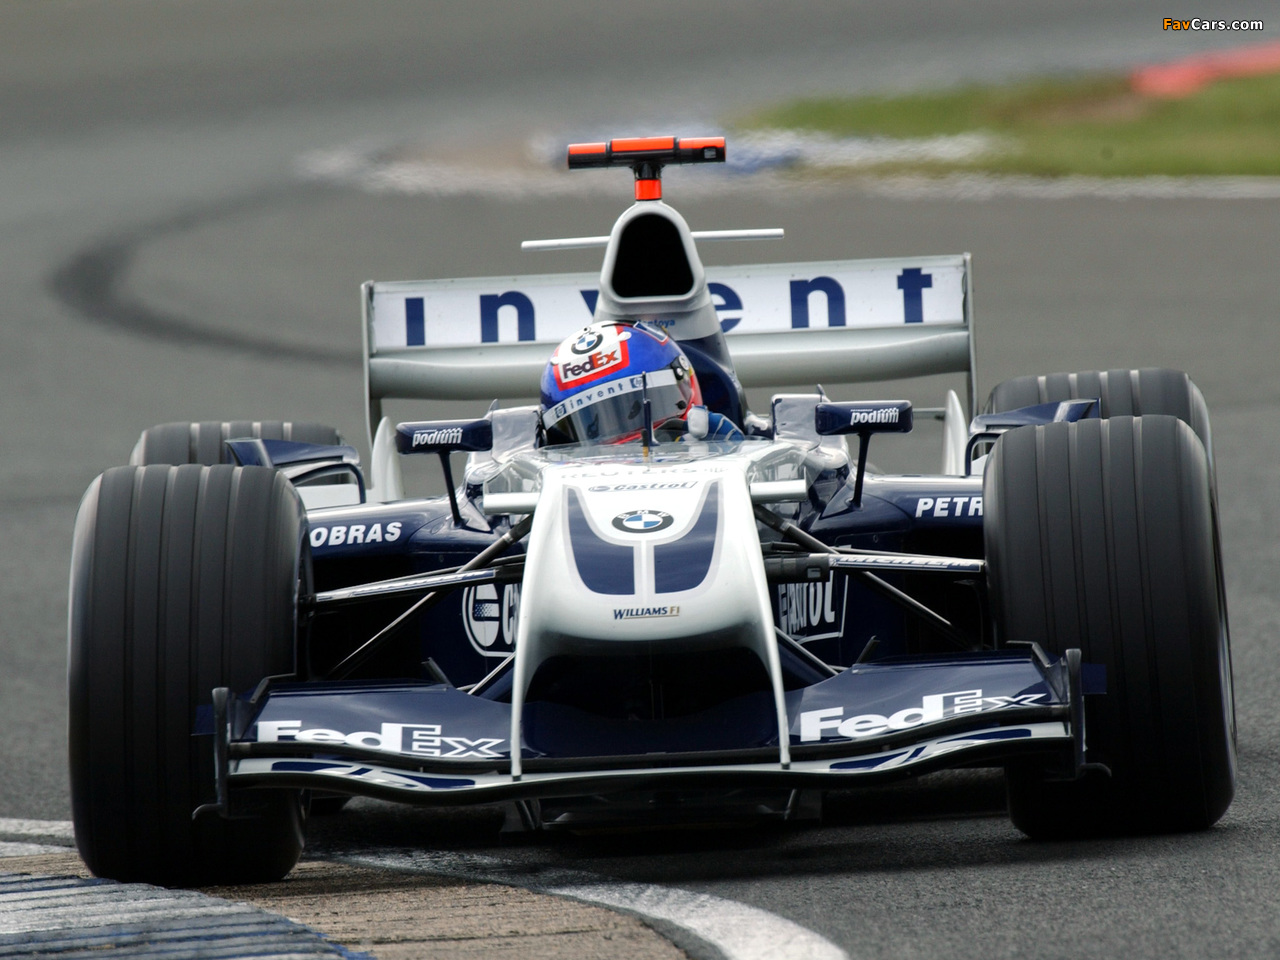 BMW WilliamsF1 FW26 (A) 2004 pictures (1280 x 960)